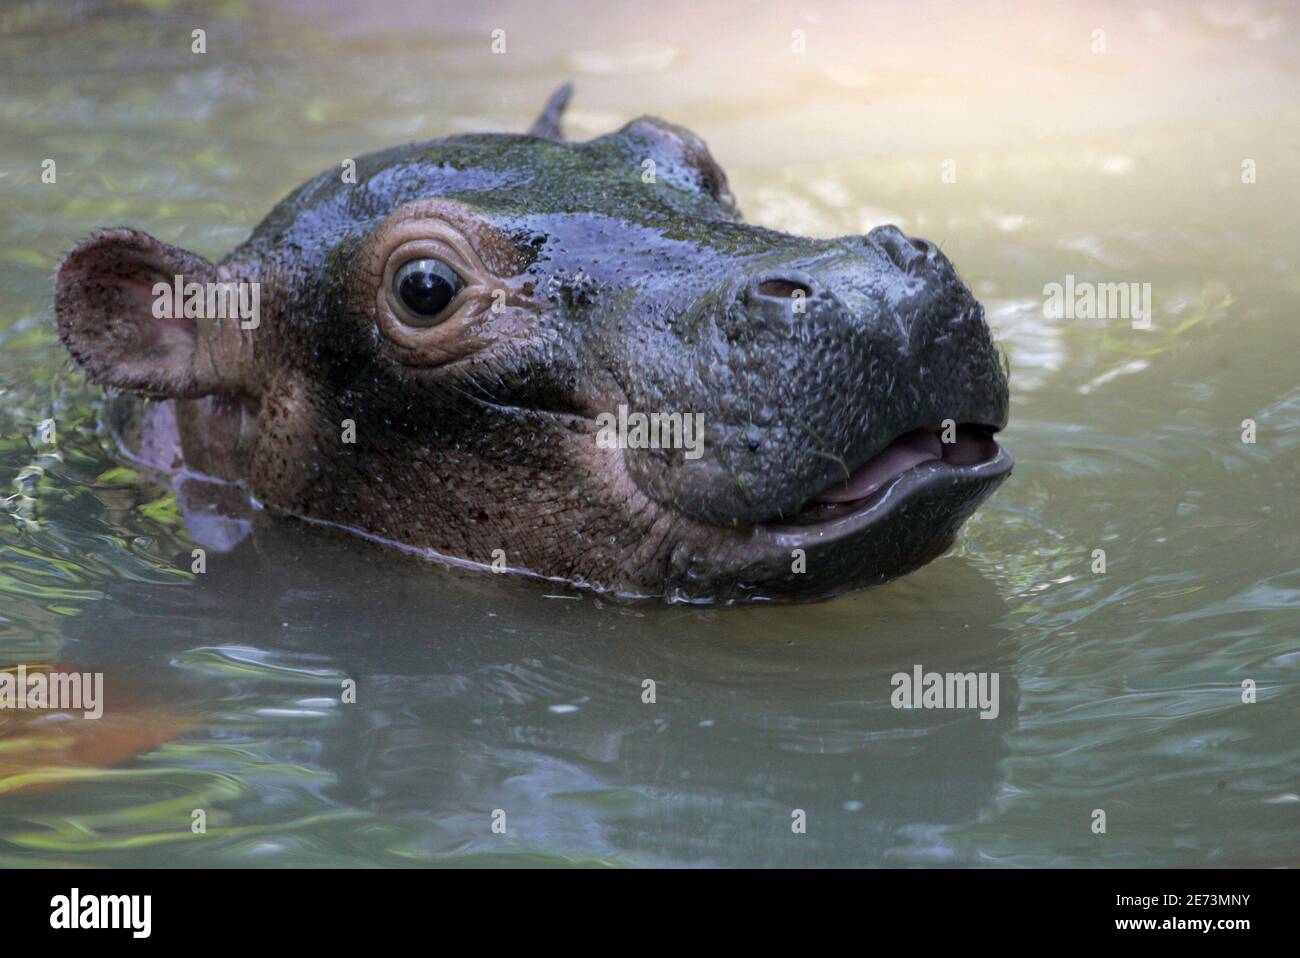 A 12-day-old Nile hippopotamus surfaces the water at Malaysia's National  Zoo in Kuala Lumpur July 29, 2009. The baby hippopotamus has not been given  a name. REUTERS/Bazuki Muhammad (MALAYSIA ENVIRONMENT SOCIETY ANIMALS